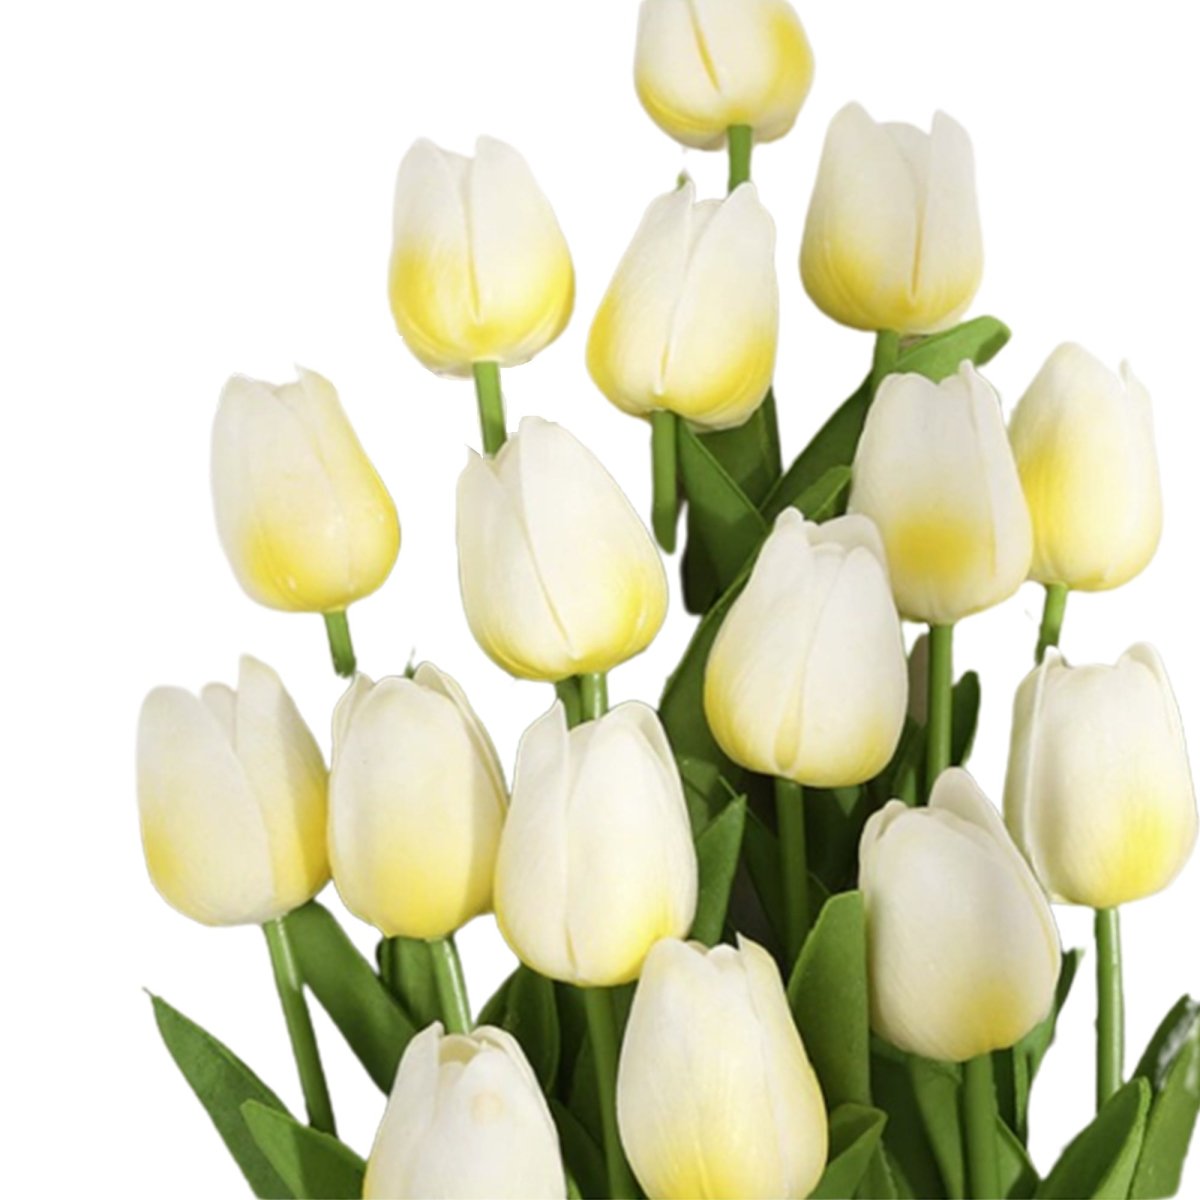 10x Artificial Tulips Flowers 35cm Stem Bouquet Fake Flower Wedding Bridal Decoration - White Yellow - - Asia Sell